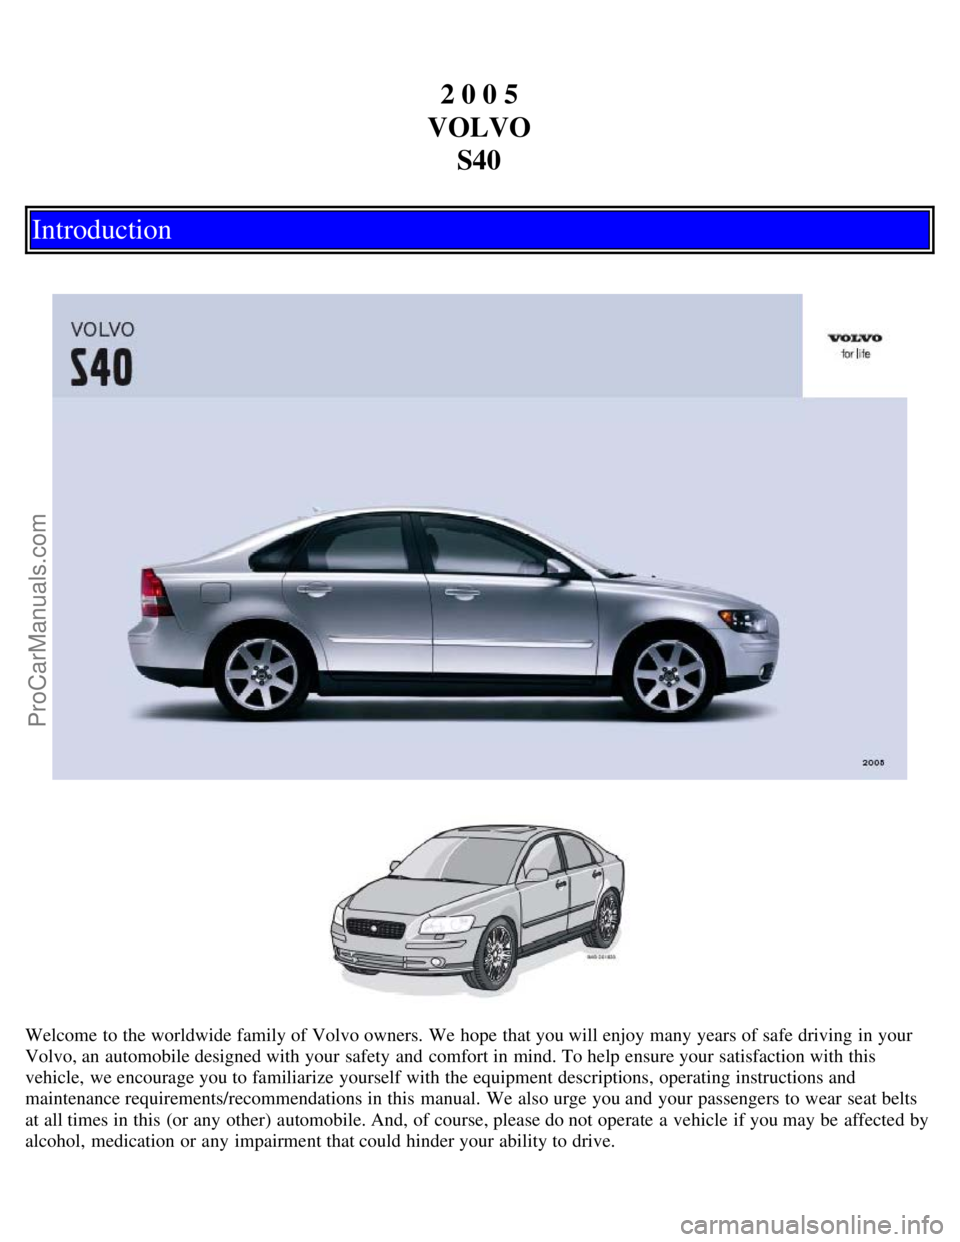 VOLVO S40 2005  Owners Manual 2 0 0 5
VOLVO S40
Introduction
Welcome to the worldwide family of Volvo owners. We hope  that you will enjoy many years of safe driving in your
Volvo, an  automobile designed with your safety and  com